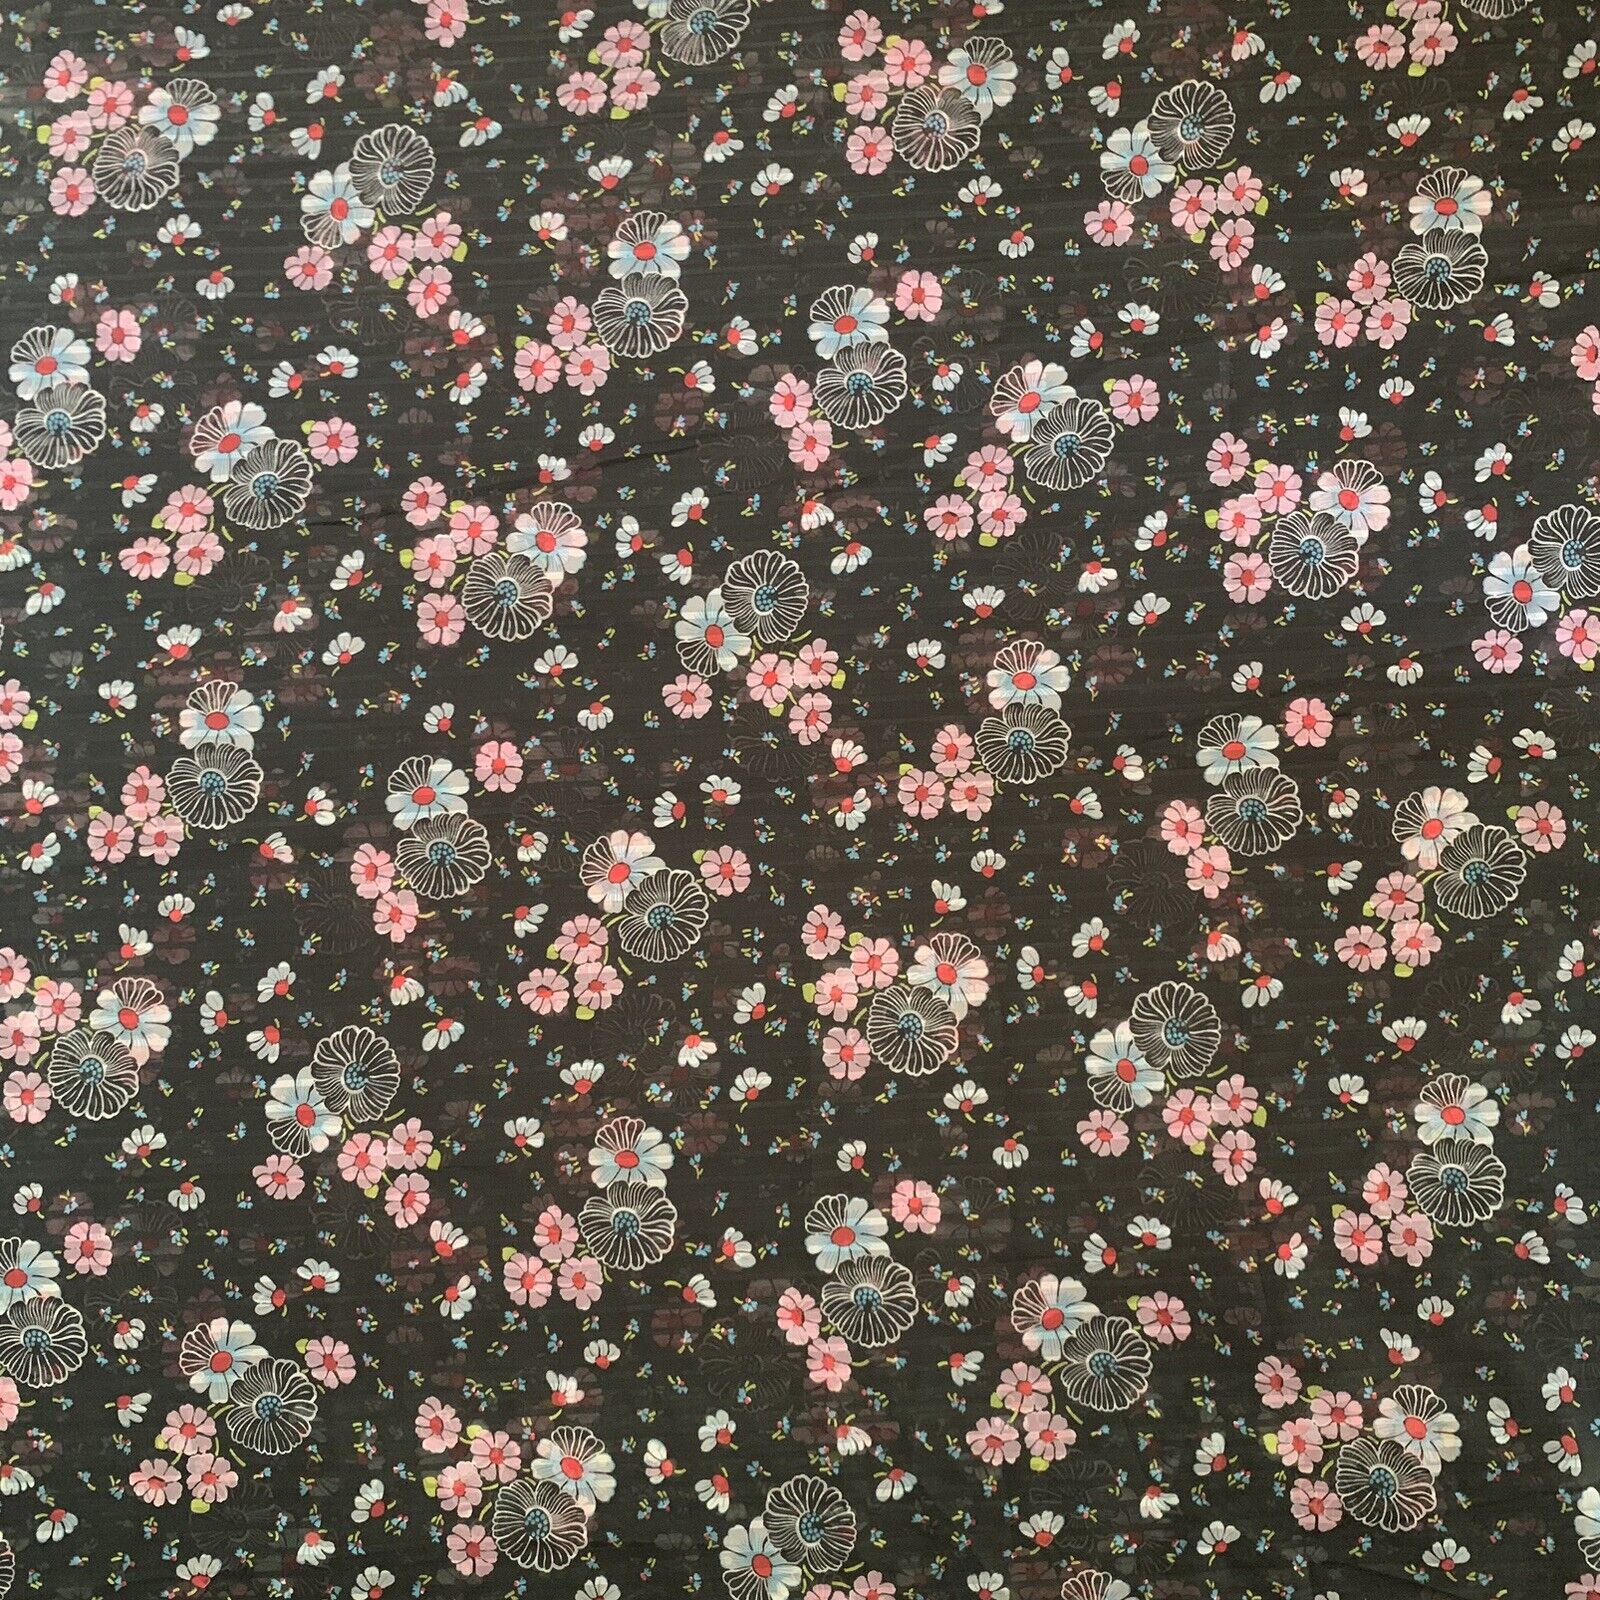 Vintage Sheer Polyester Black Floral Specialty Fabric Approx 111x55.5”